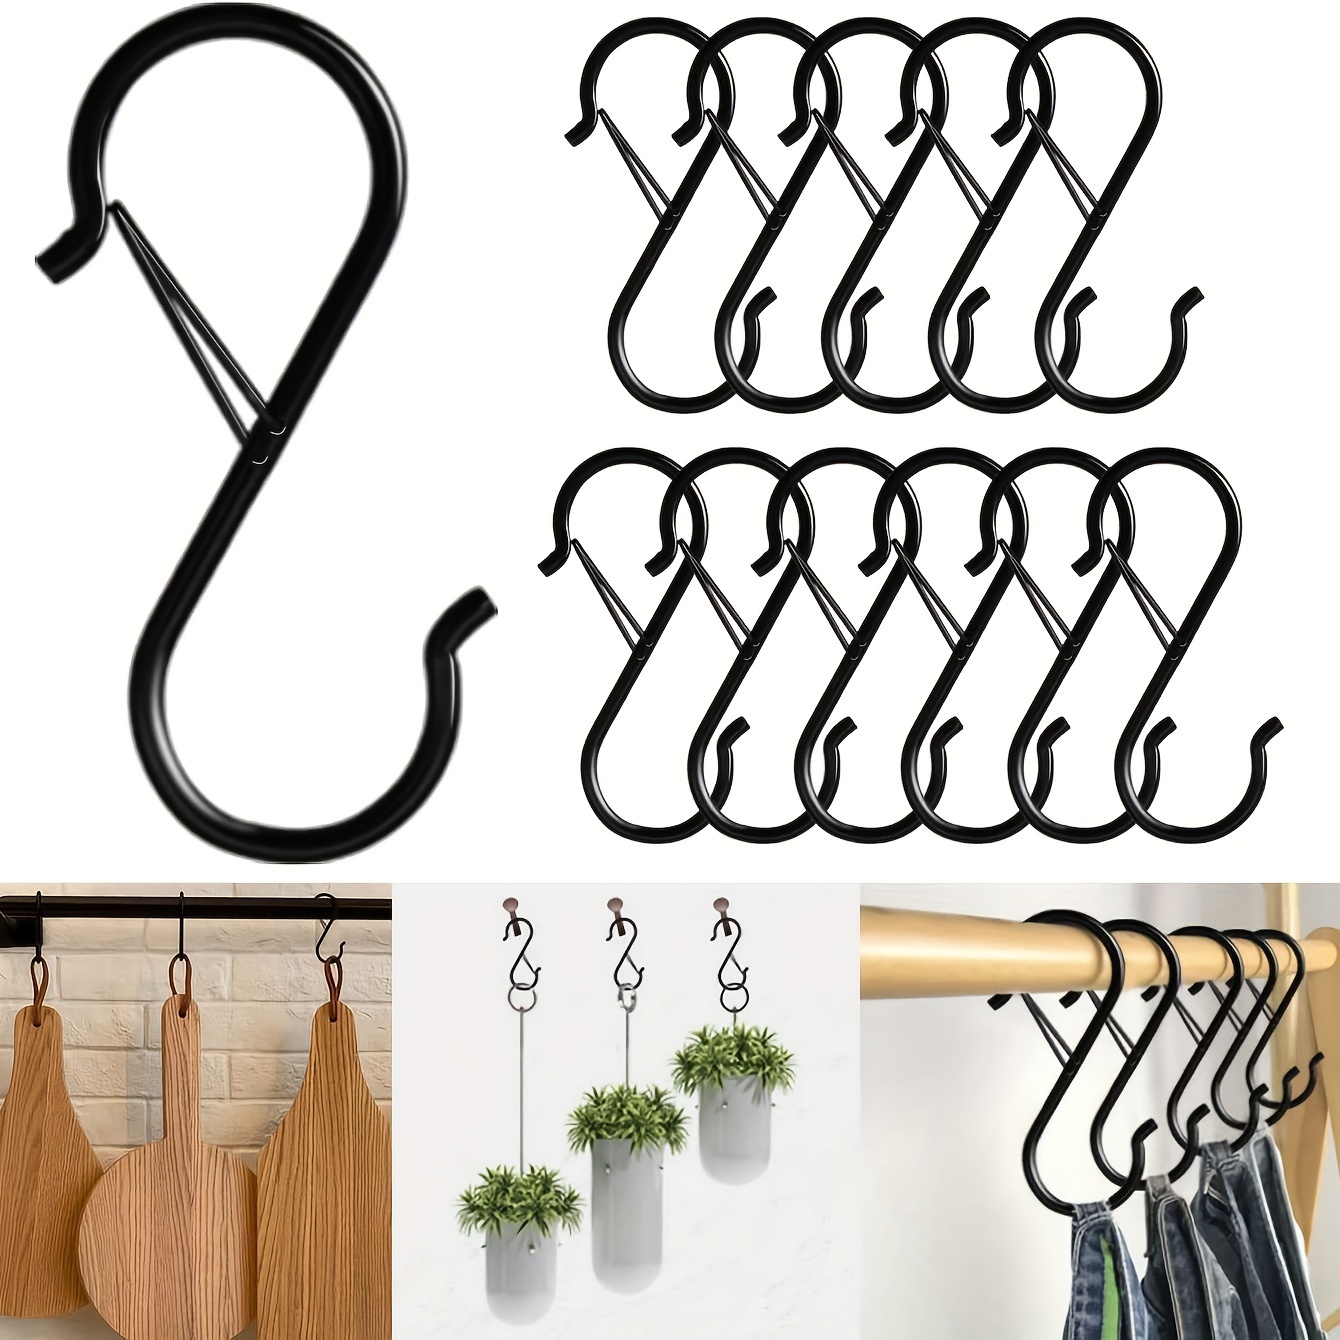 Mikewe 20 Pack Heavy Duty S Hooks Pan Pot Holder Rack Hooks Hanging Hangers S Shaped Hooks For Kitchenware Pots Utensils Clothes Bags Towels Plants Bl